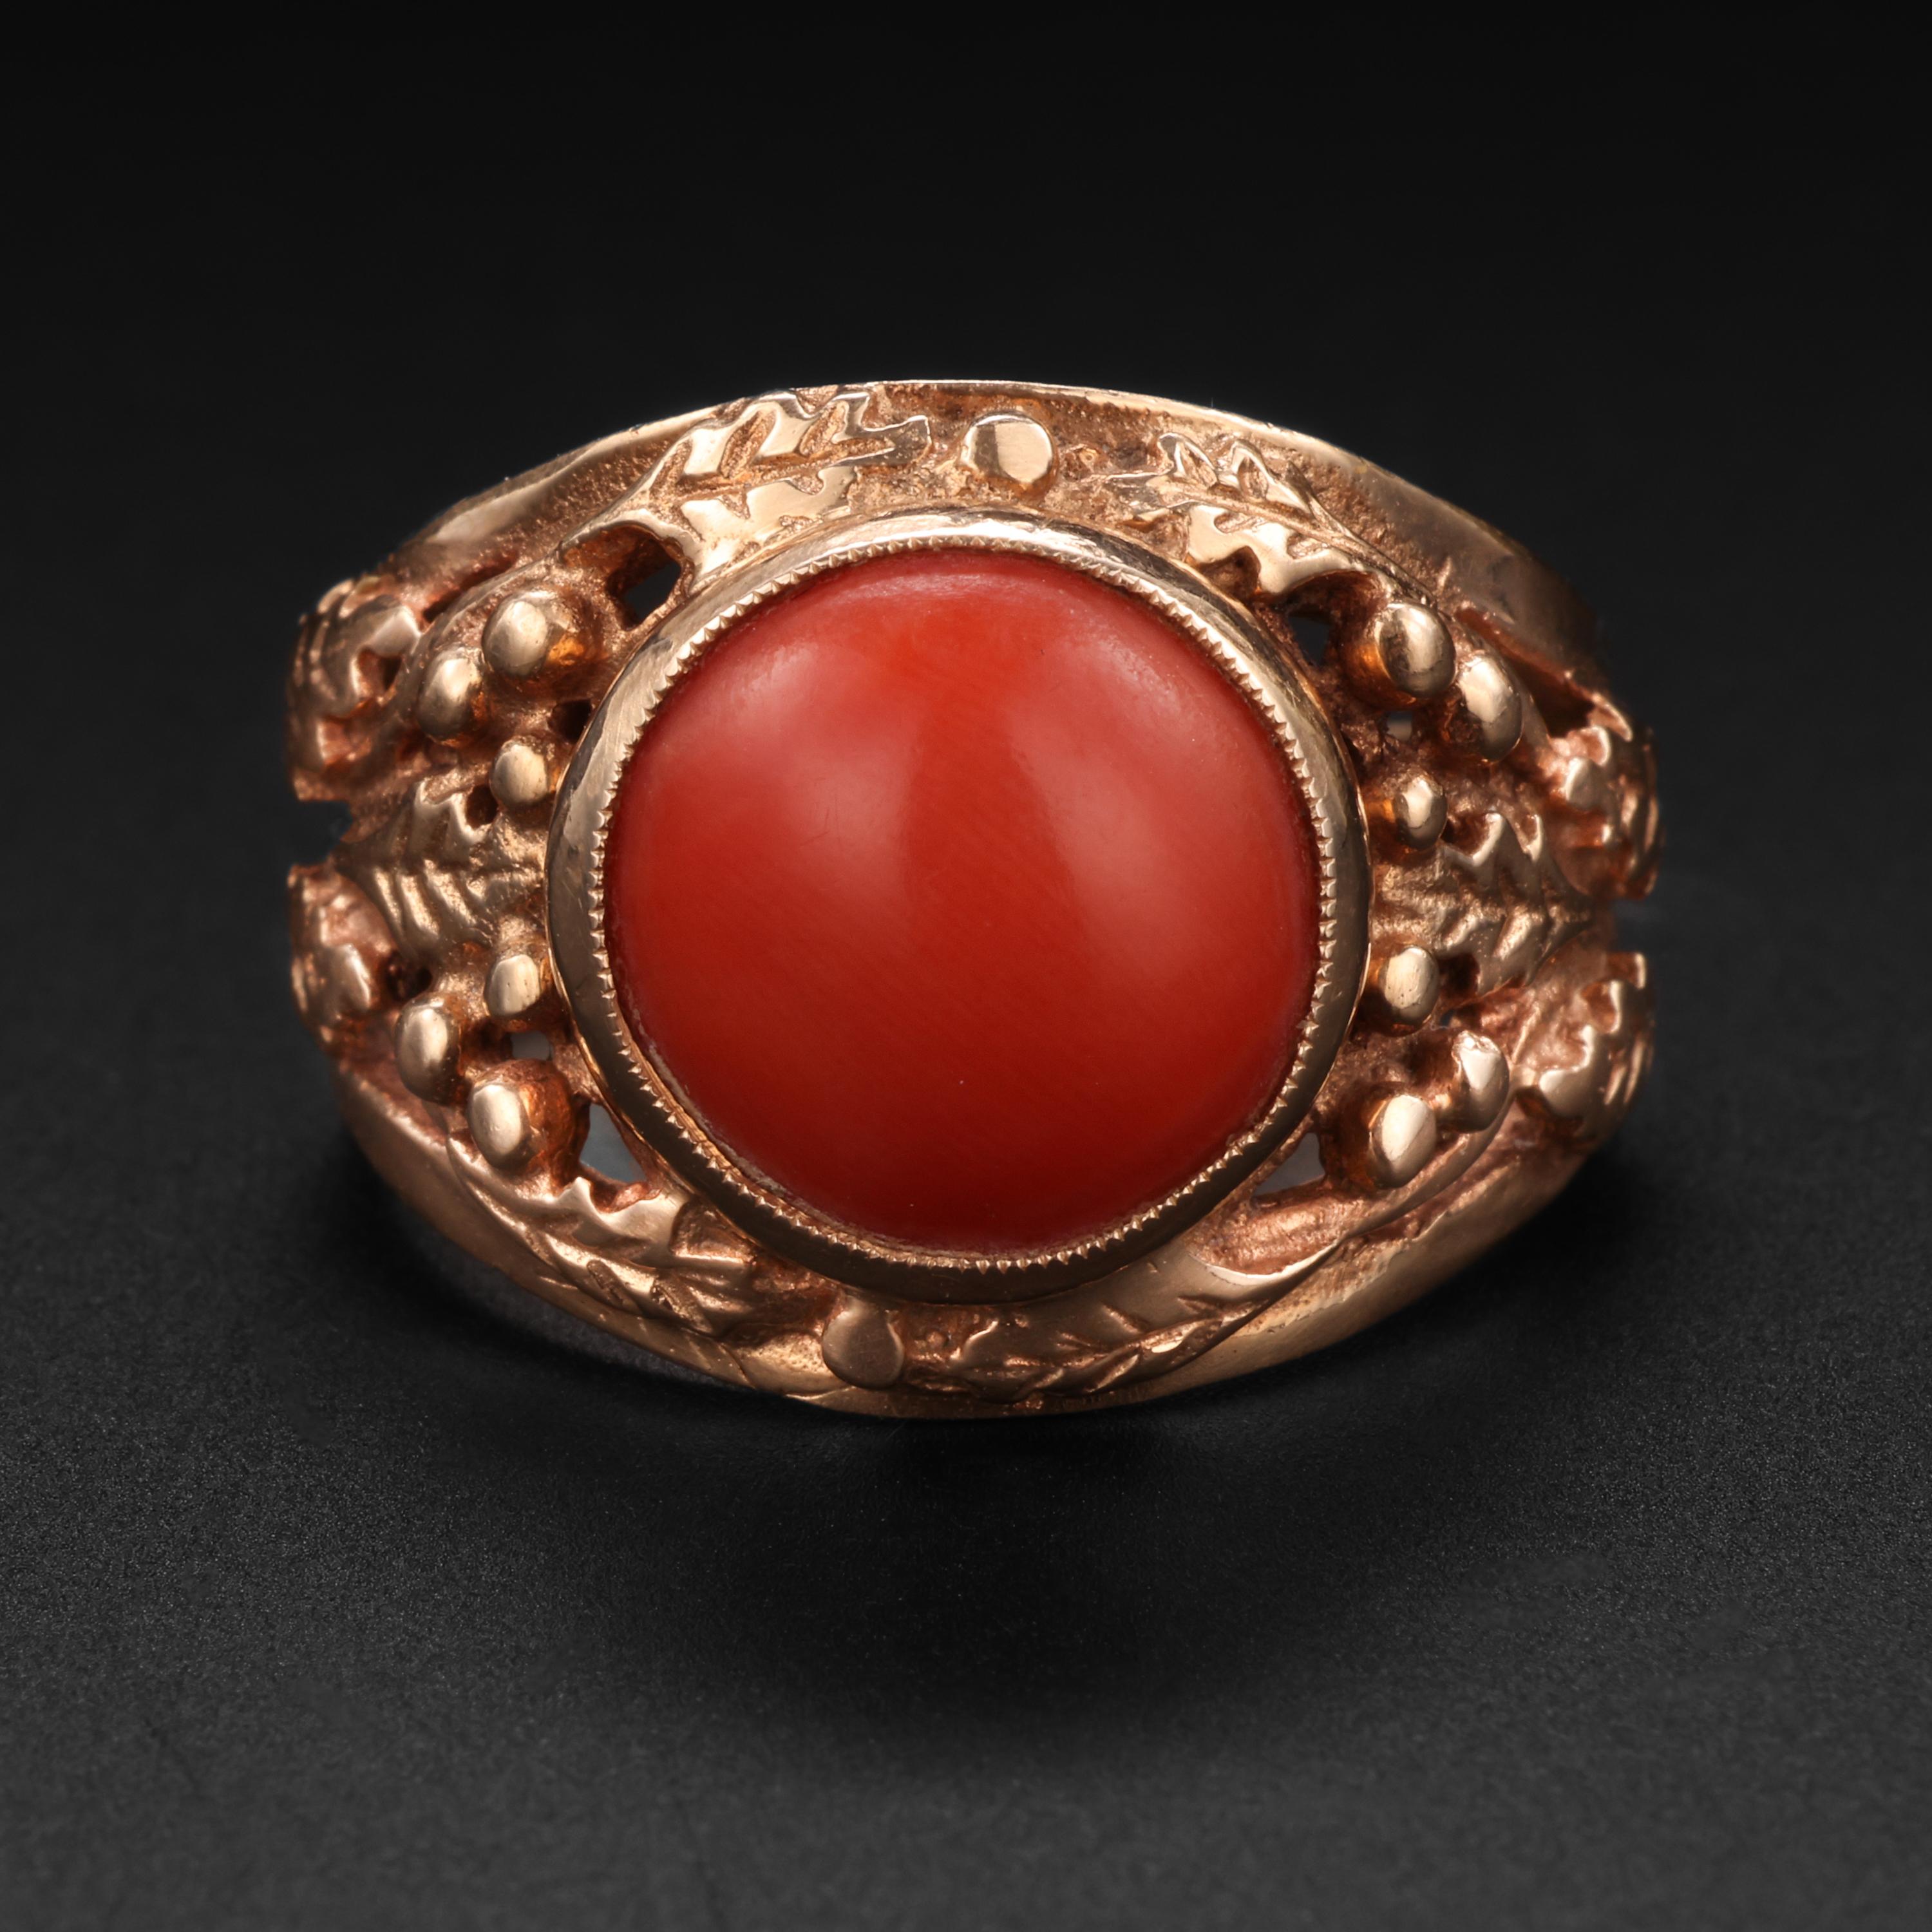 This richly ornate, entirely hand-fabricated 14K gold and coral ring would, at first glance, appear to be a Victorian-era ring. But the unmolested row of hallmarks on the rear of the shank testify to the fact that it was actually created in Warsaw